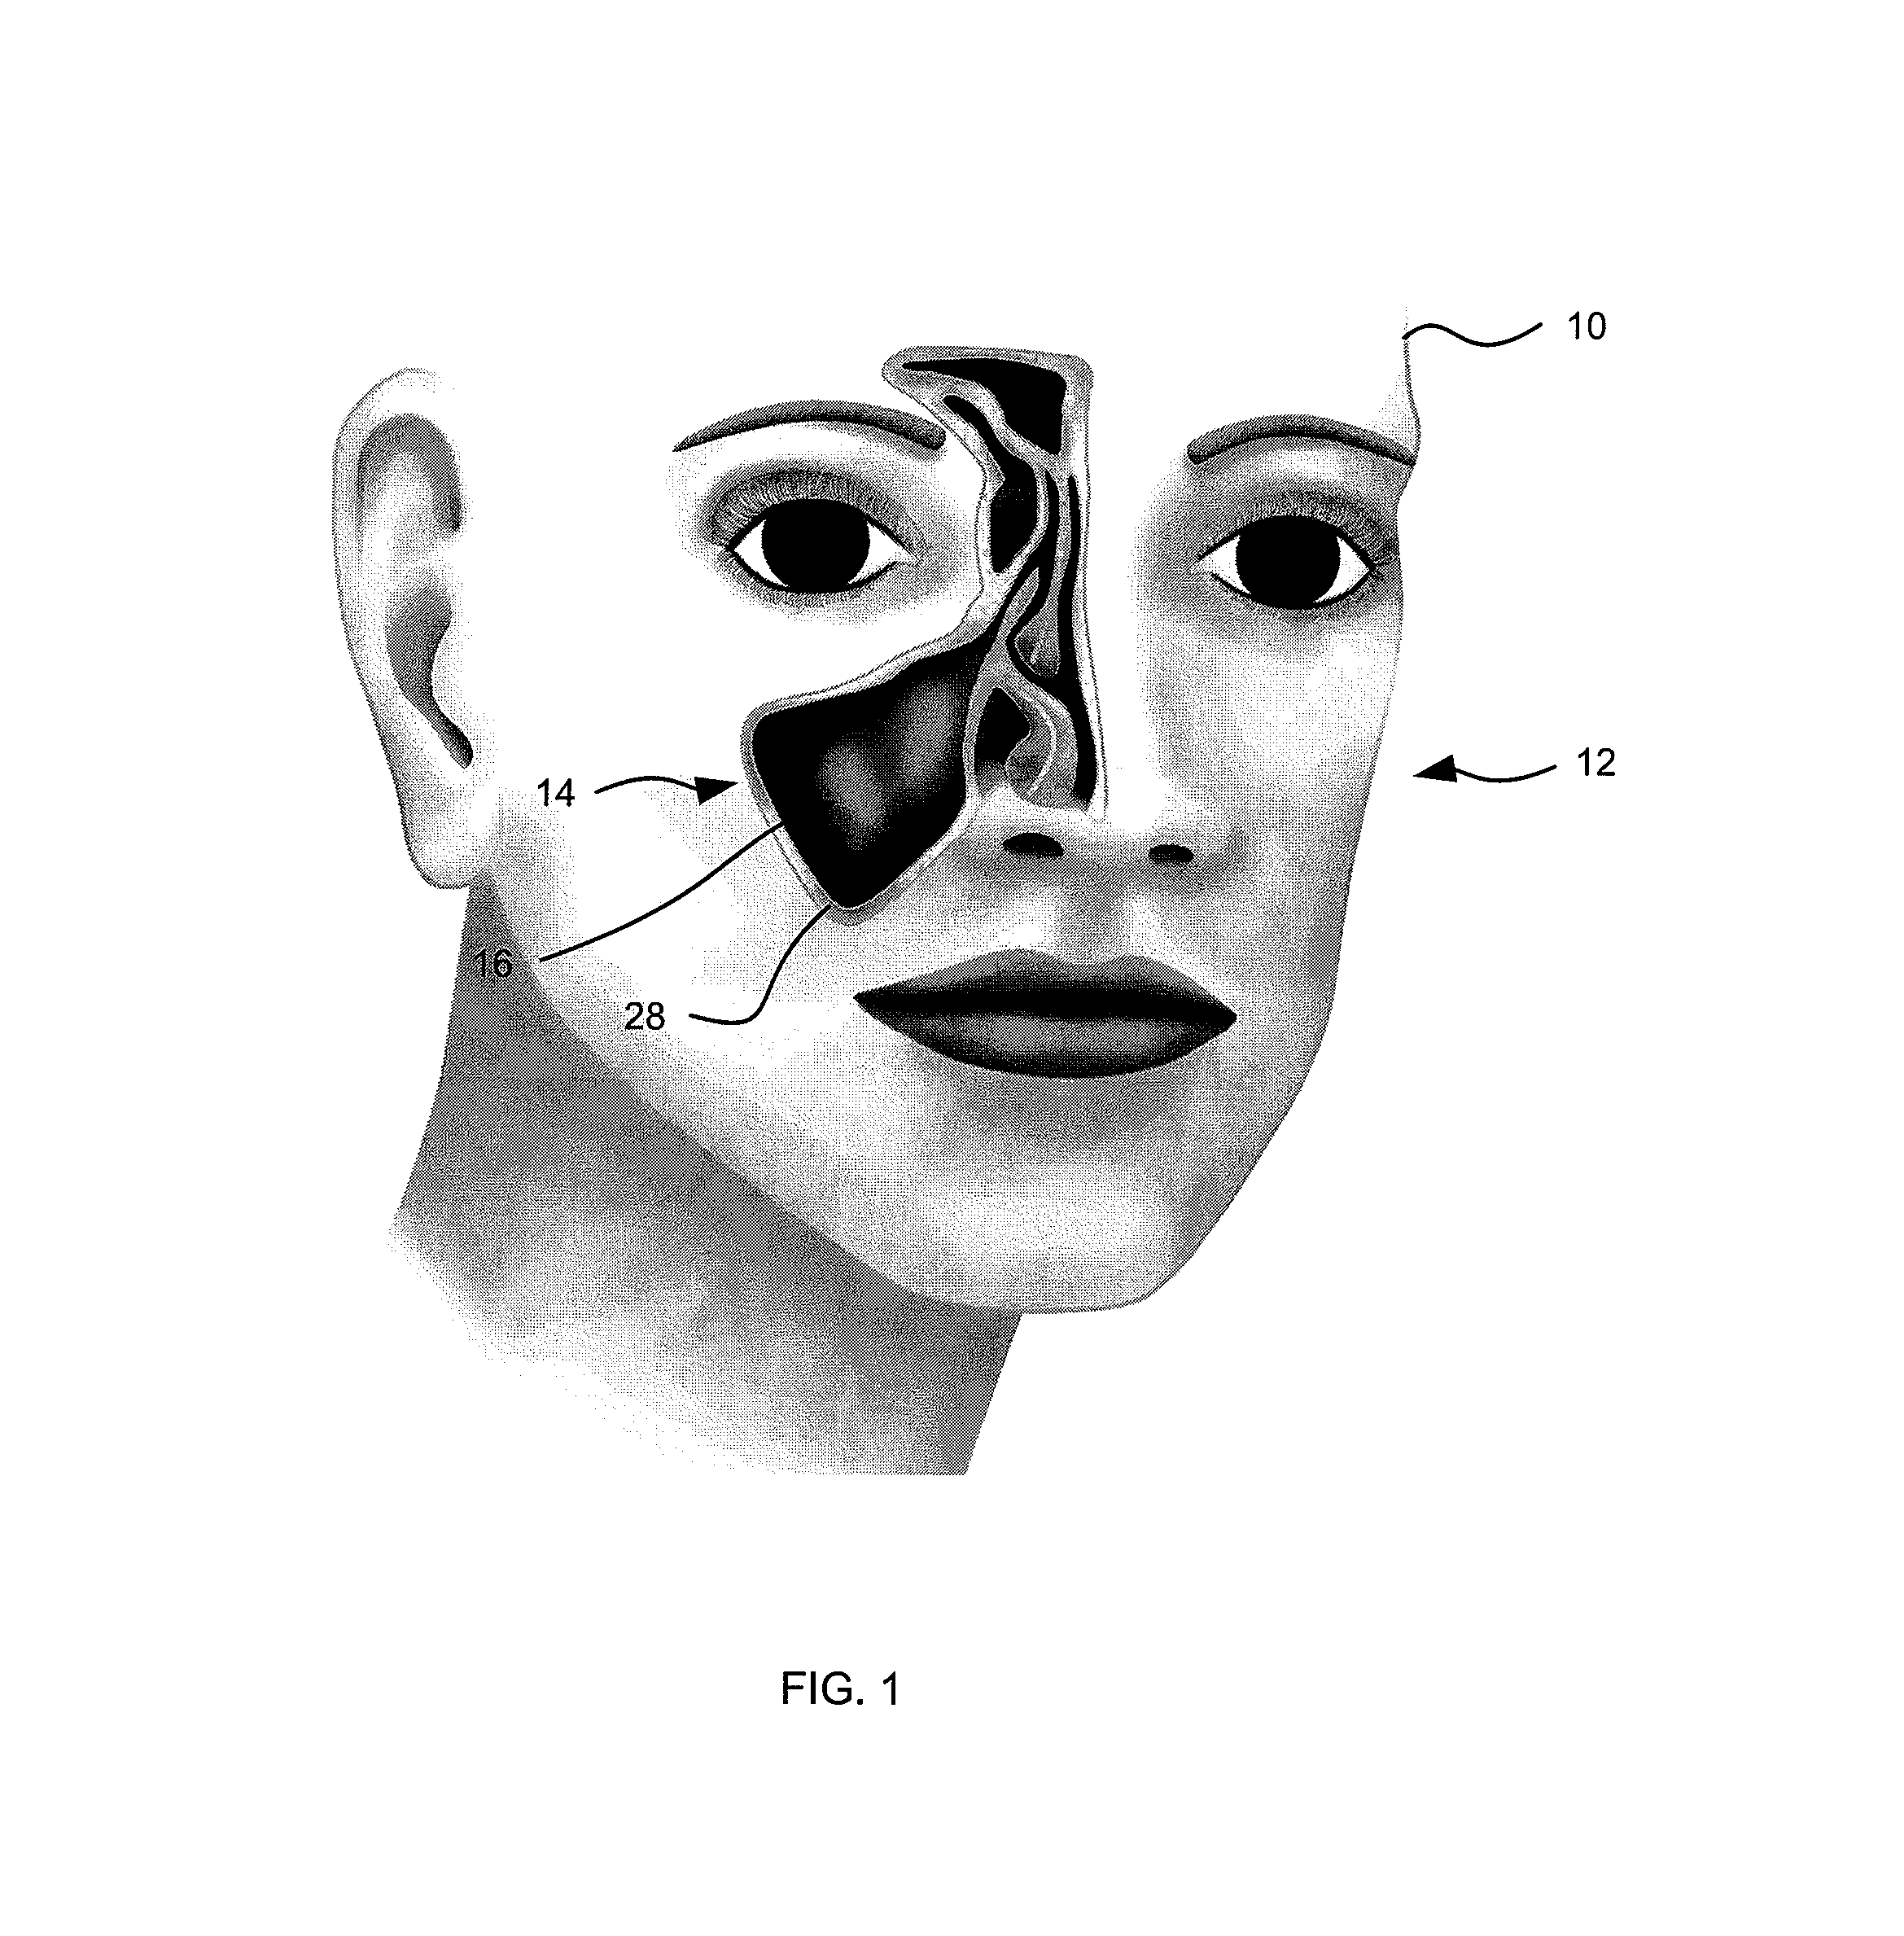 Apparatus and method for accessing a sinus cavity